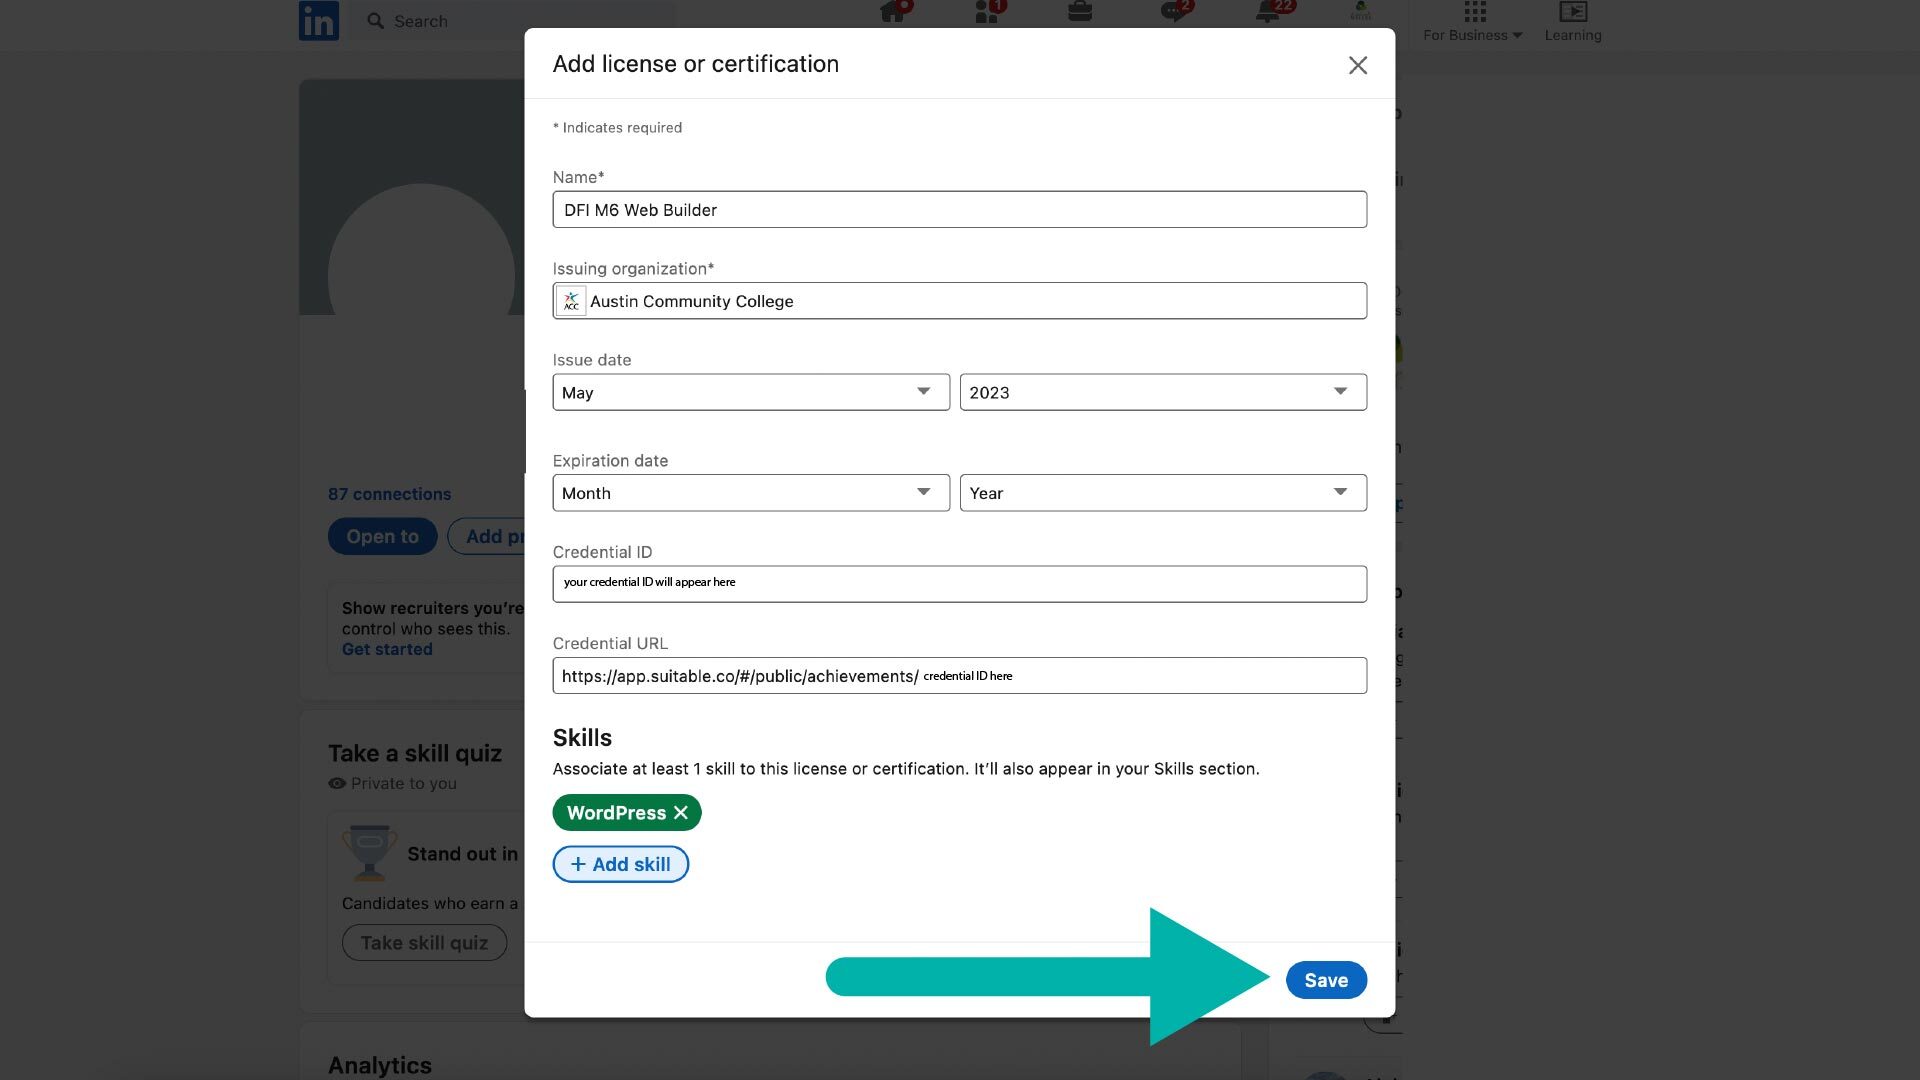 Screenshot of LinkedIn popup showing how to add a license or certification to their profile. An arrow is pointed at the "Save" button to tell ACC students what to do after associating a skill with their shared Suitable badge